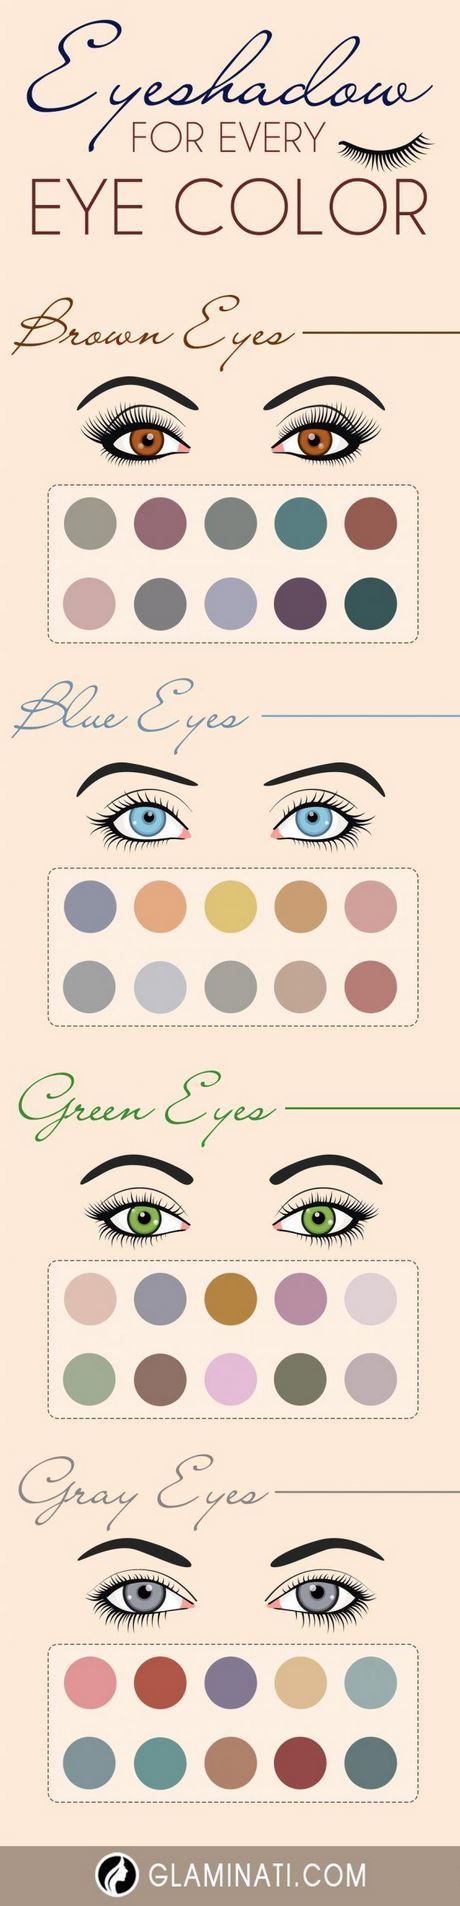 makeup-tutorial-infographic-95_2 Make-up tutorial infographic